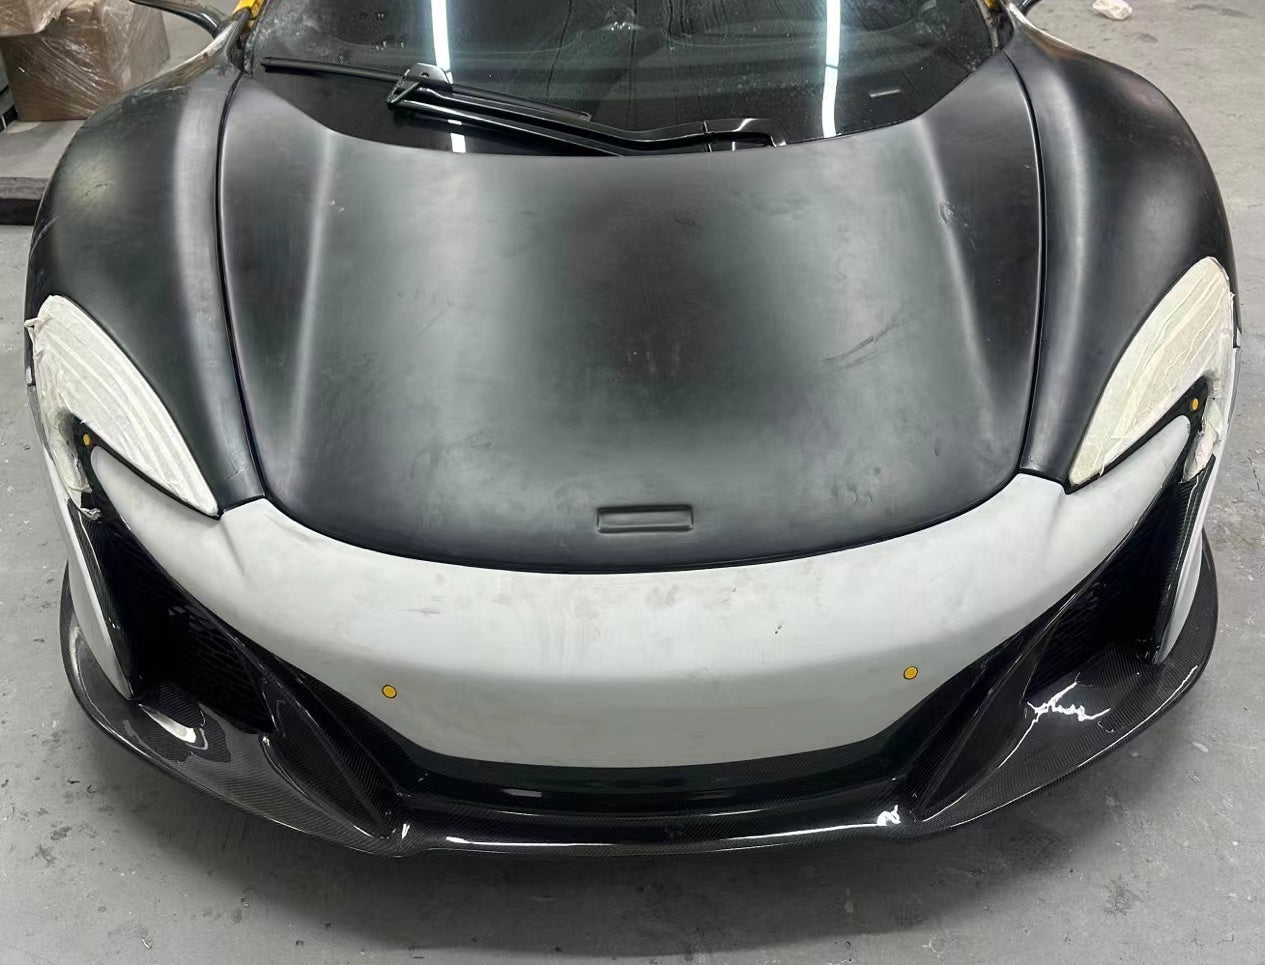 MP4-12C to 650S Conversion Kit with Headlights